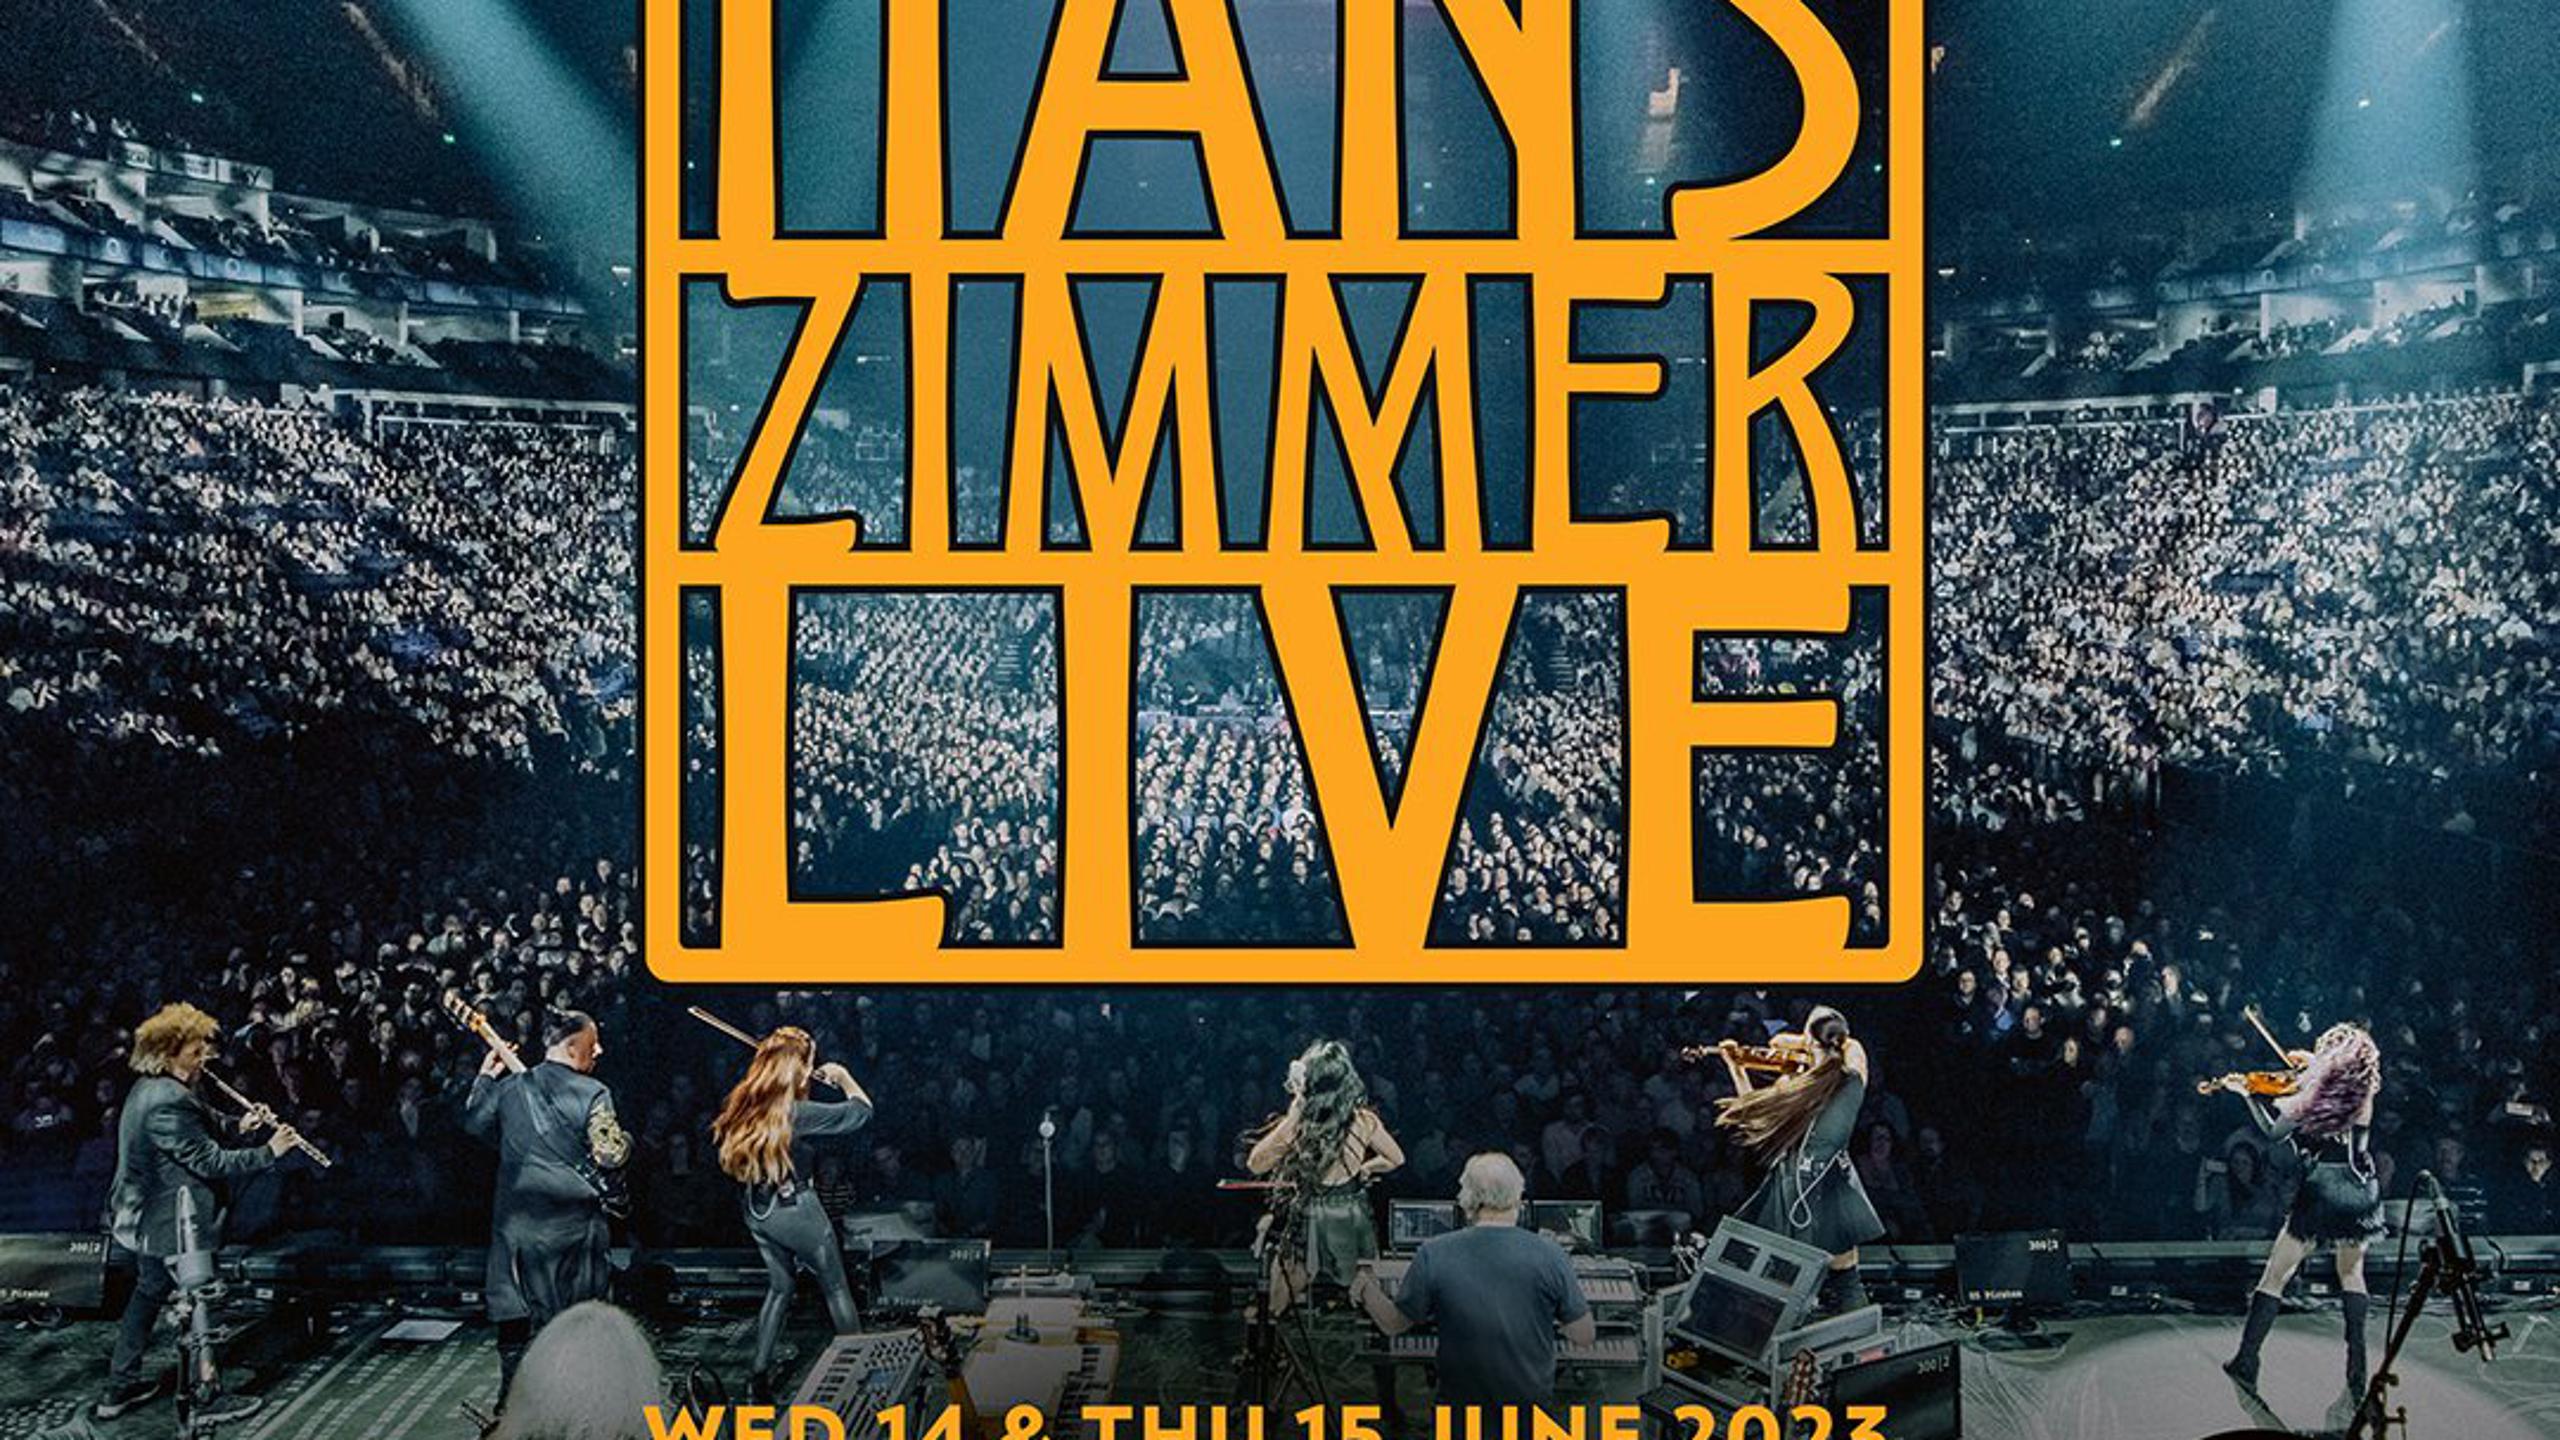 Hans Zimmer concert tickets for The O2 Arena, London Wednesday, 14 June